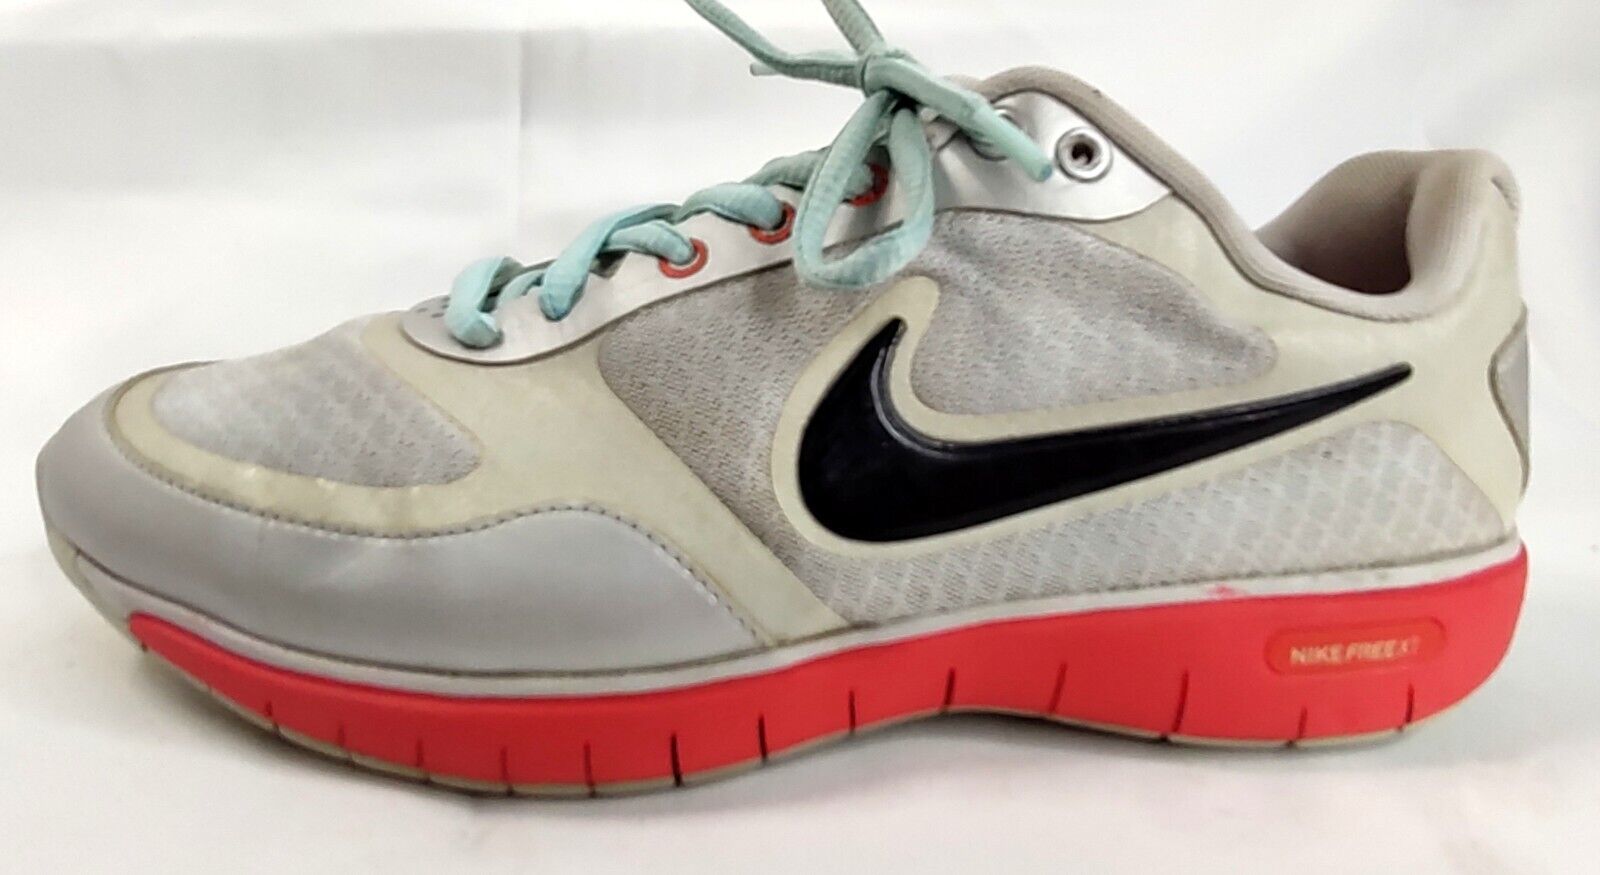 Primary image for NIKE Free XT 429844-100 Training Everyday Fit Size 7